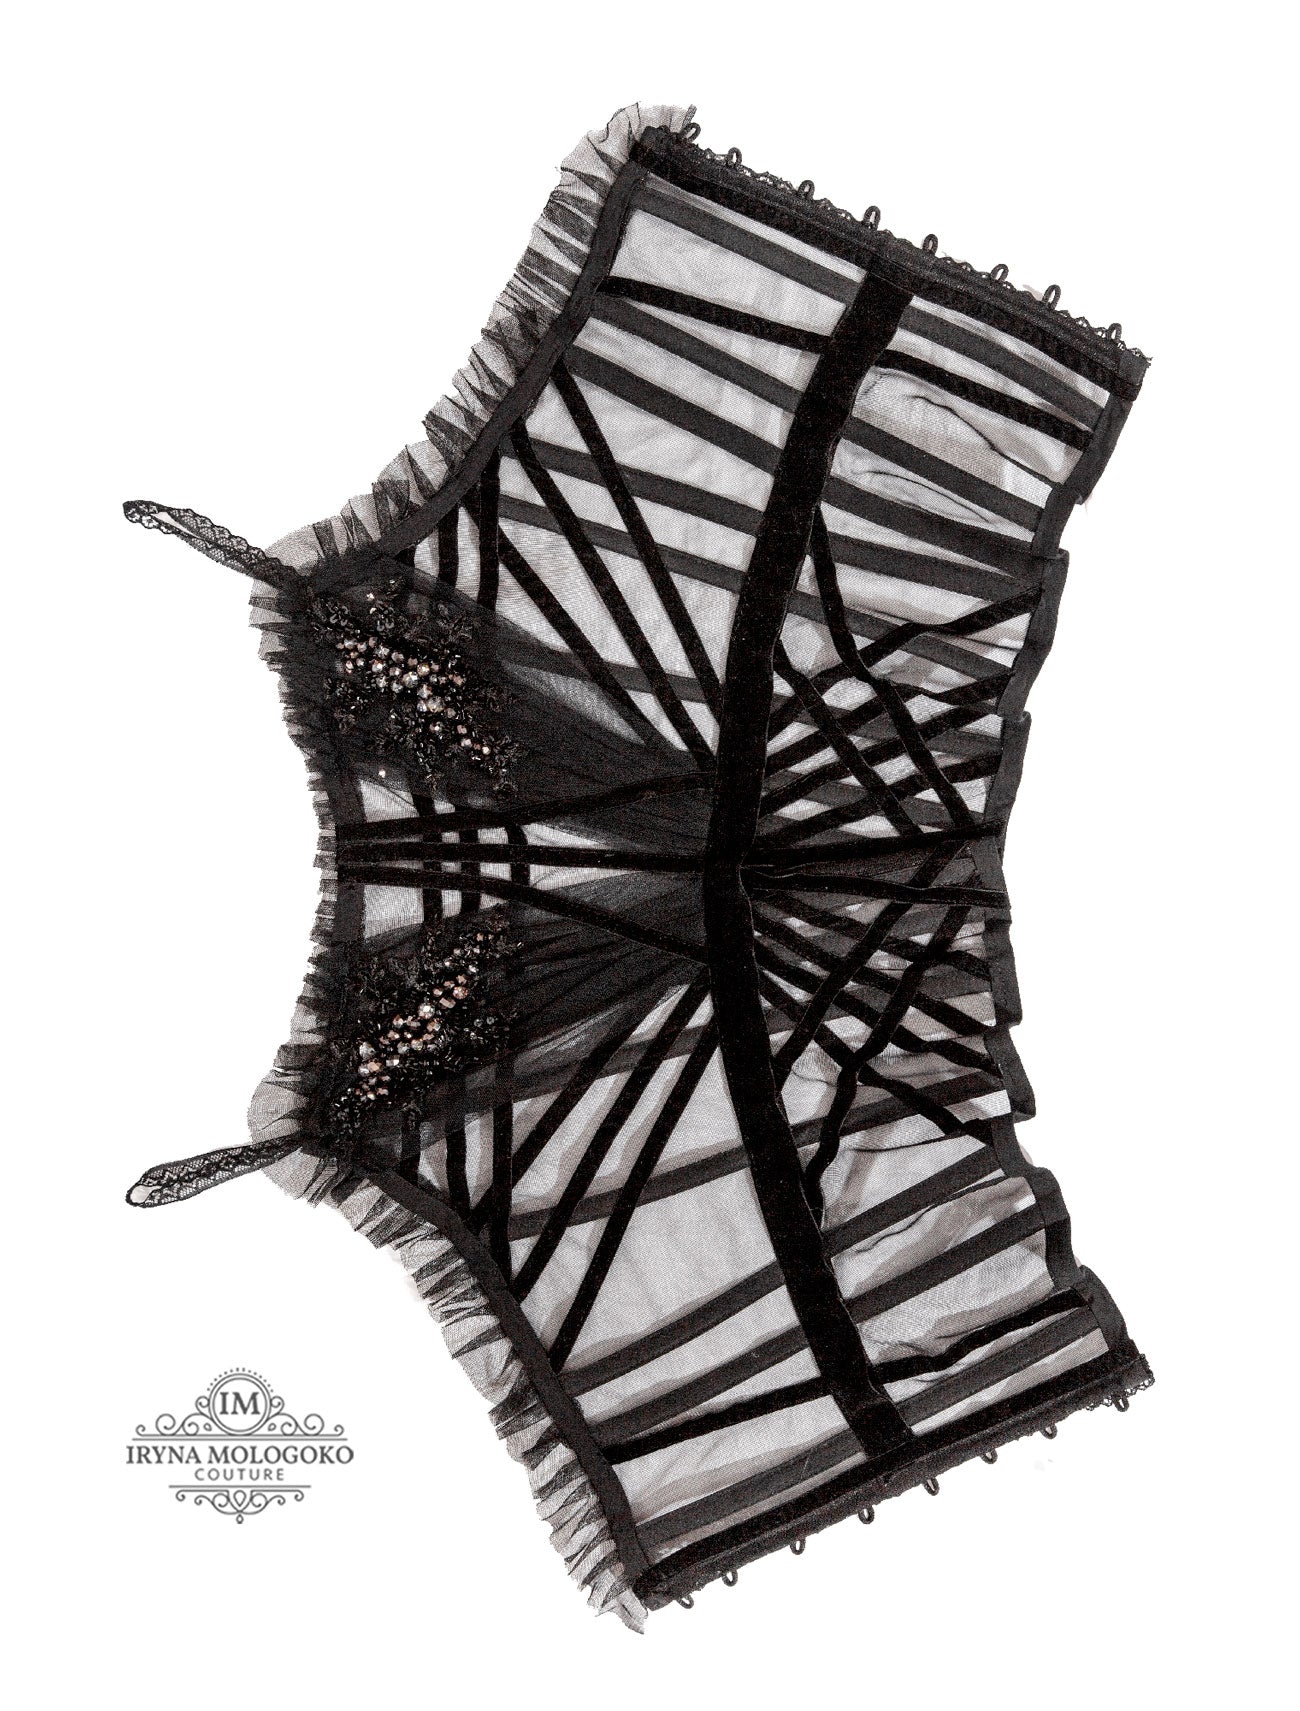 Syrena Red Carpet Style Goth Corset